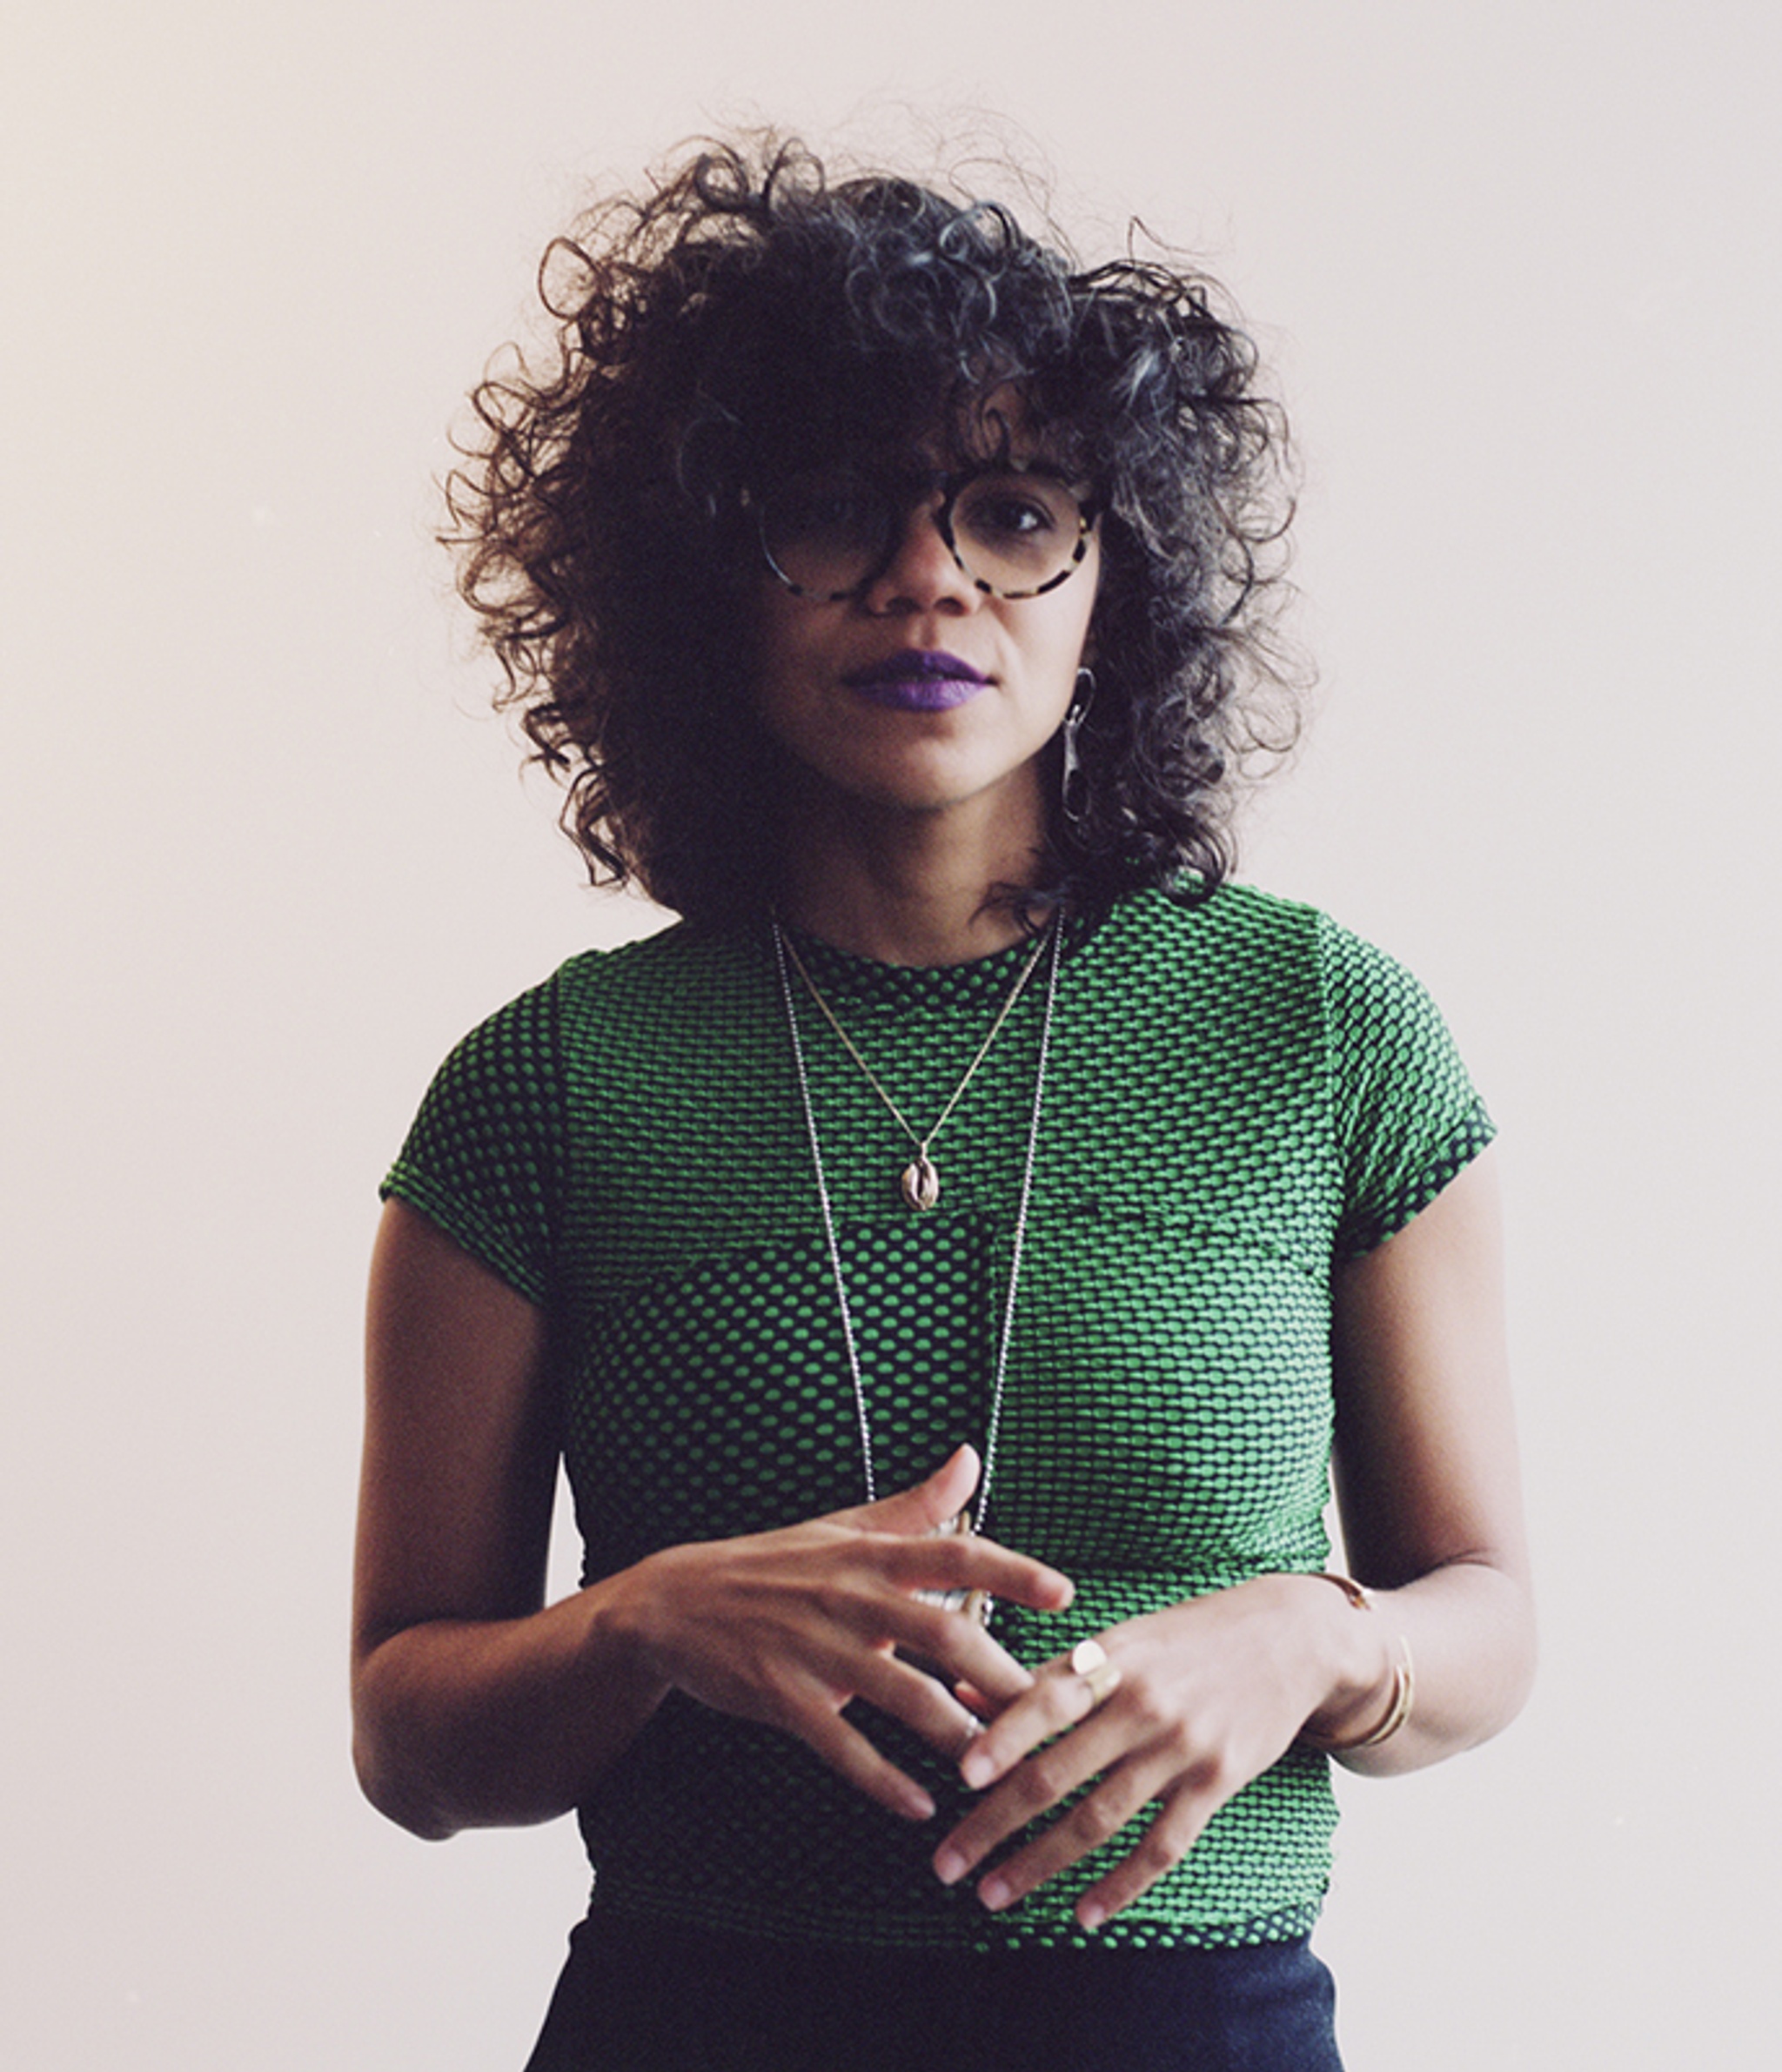 A portrait of Lizania Cruz, a Dominican artist who has curly hair that she wears over her forehead, slightly covering her eyes. She poses with her hands brought together in front of her waist and wears a green short sleeve shirt, long necklaces, glasses. She looks at us. Photo by Guarinex Rodriguez. 